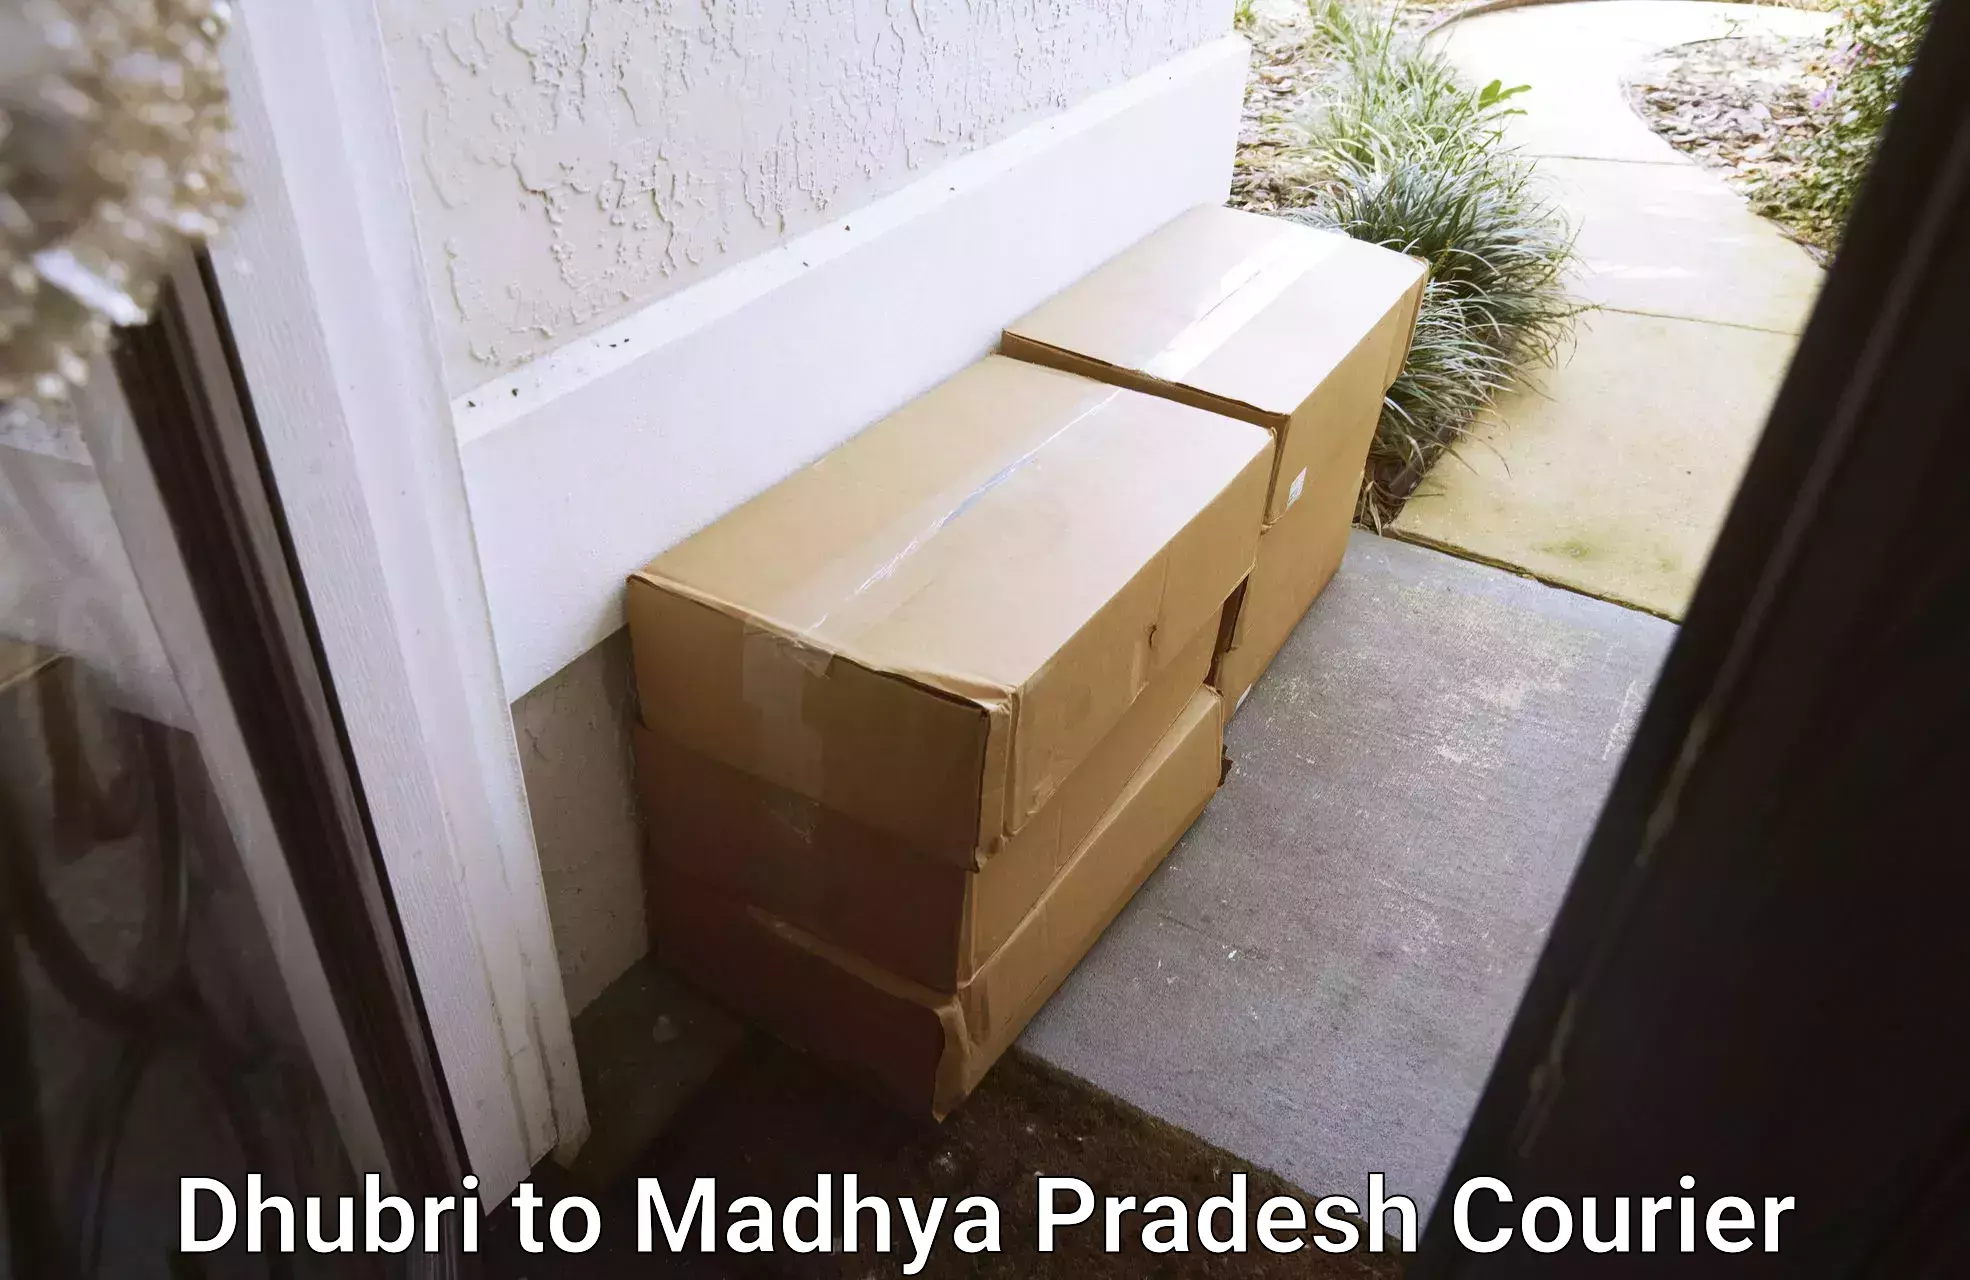 Parcel service for businesses Dhubri to Madhya Pradesh